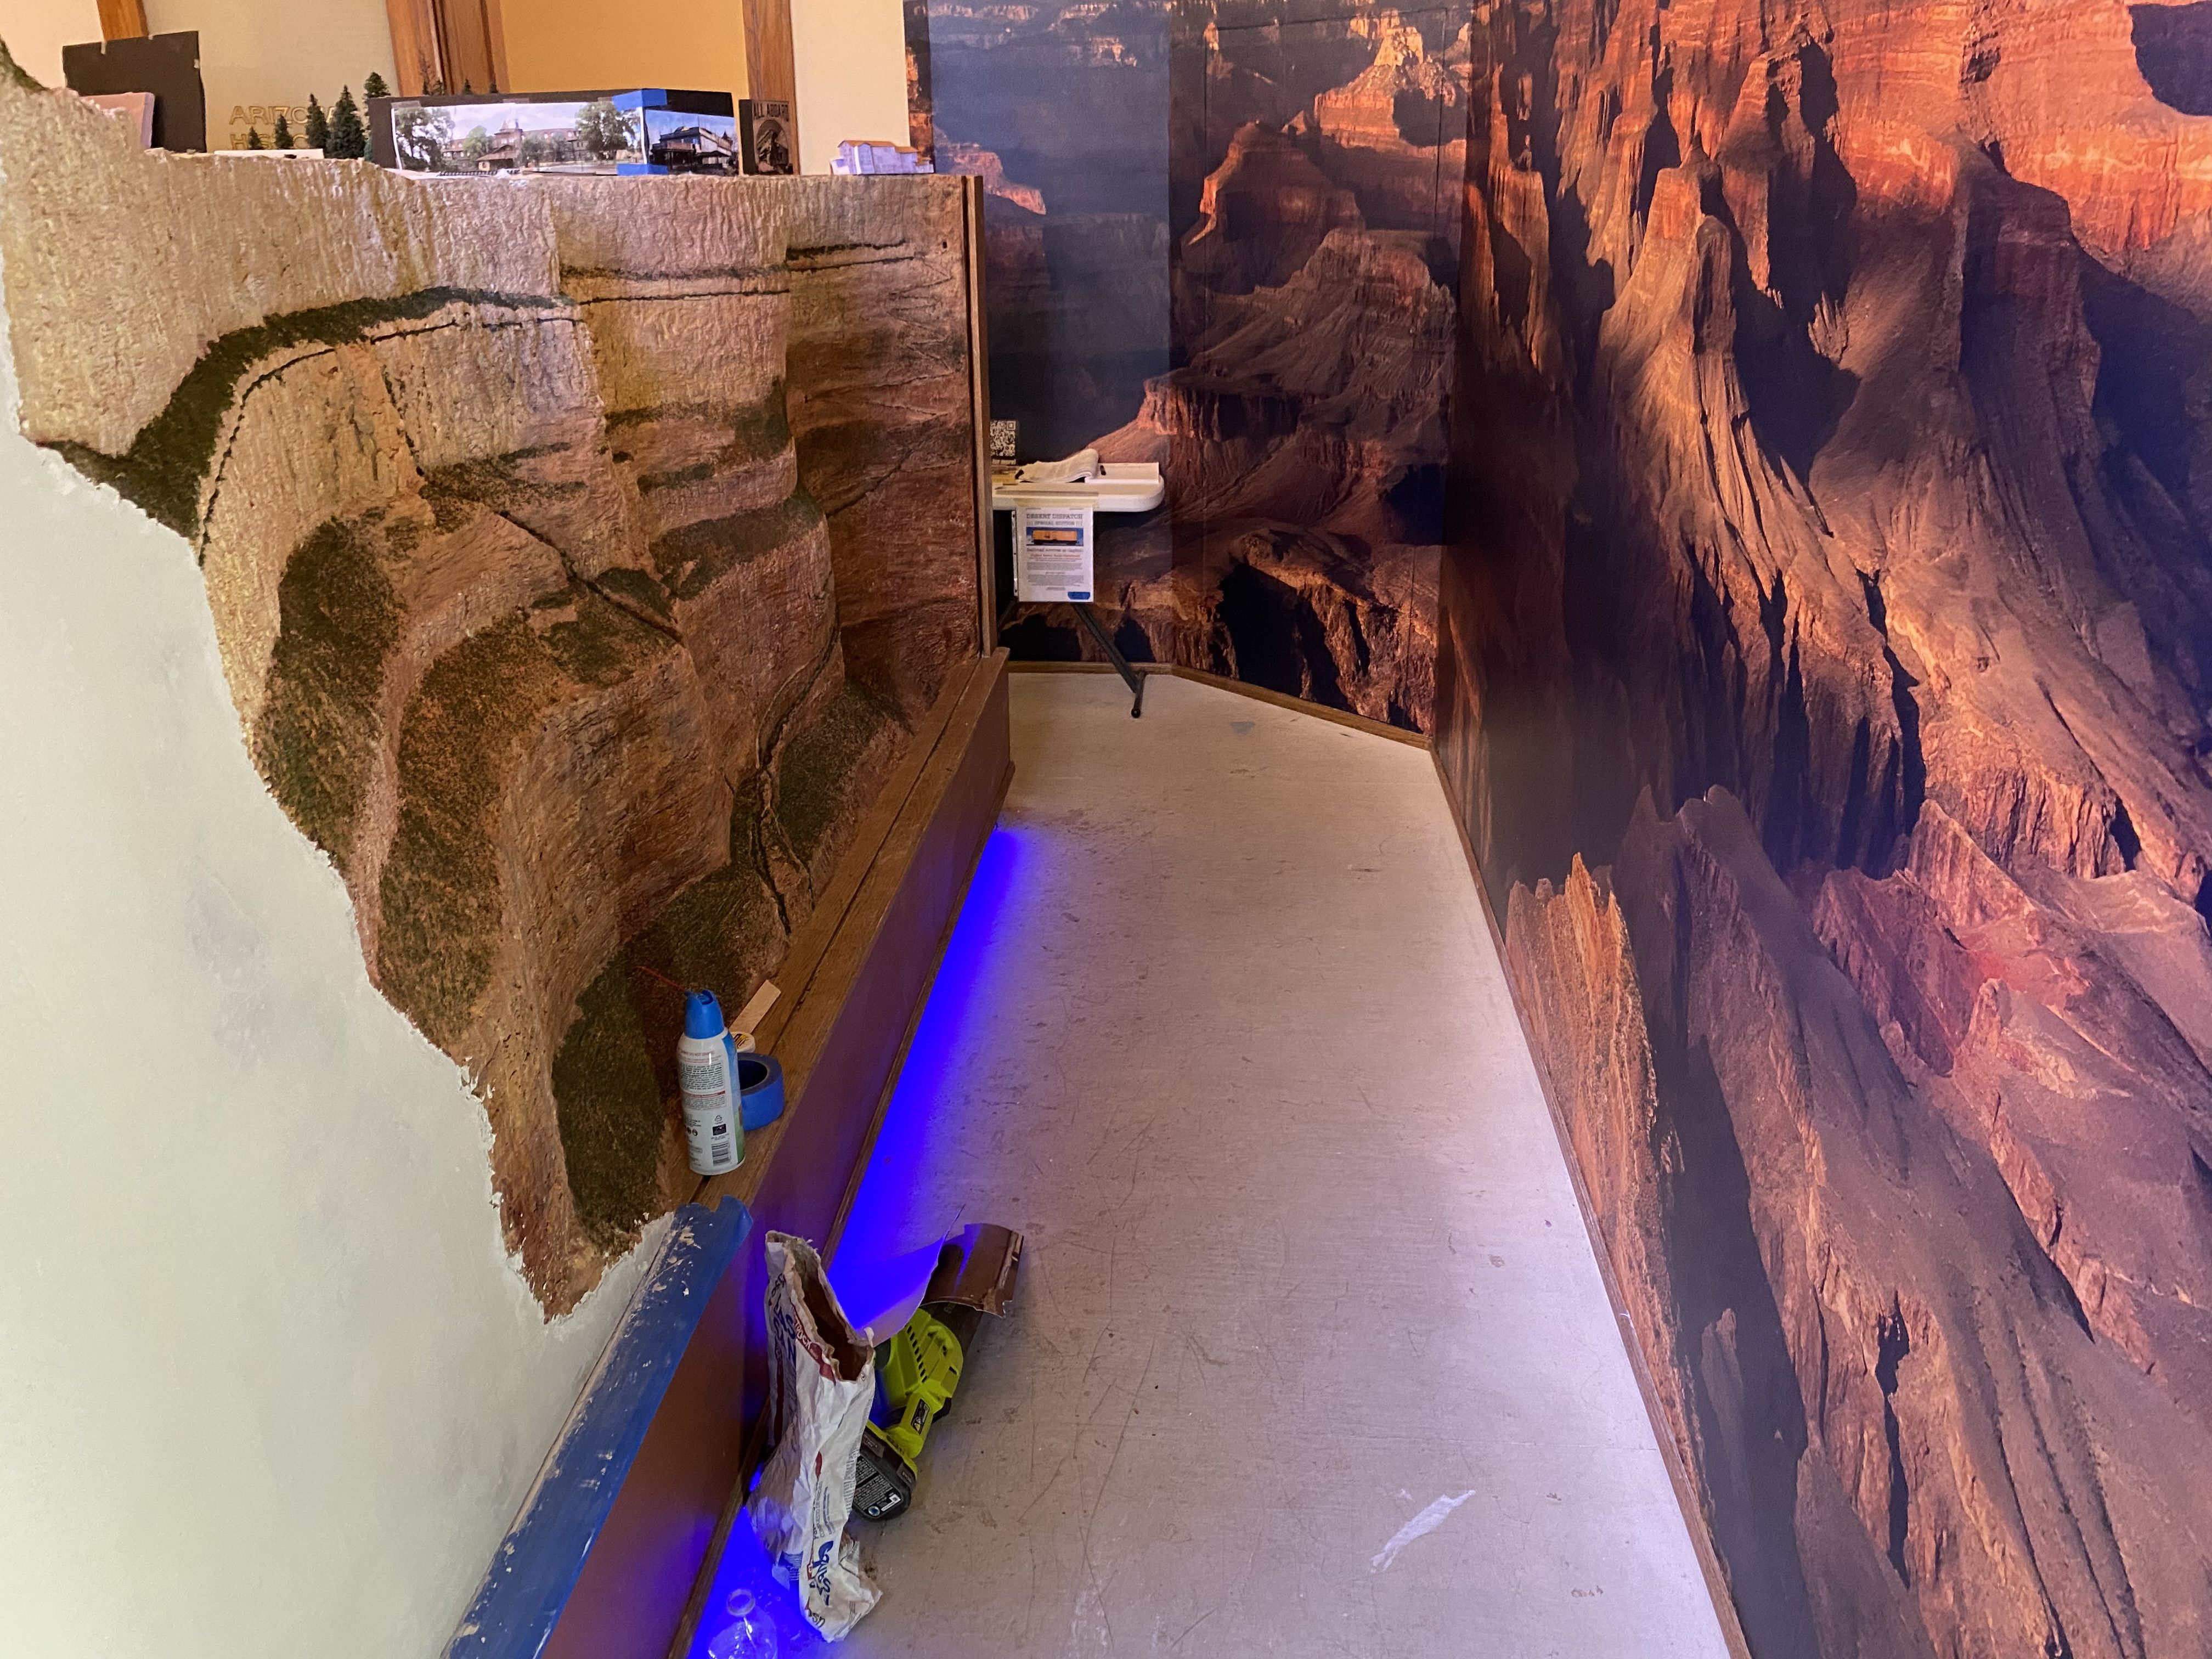 A partially incomplete plaster model of the south rim of the Grand Canyon facing a panoramic photo of the north rim